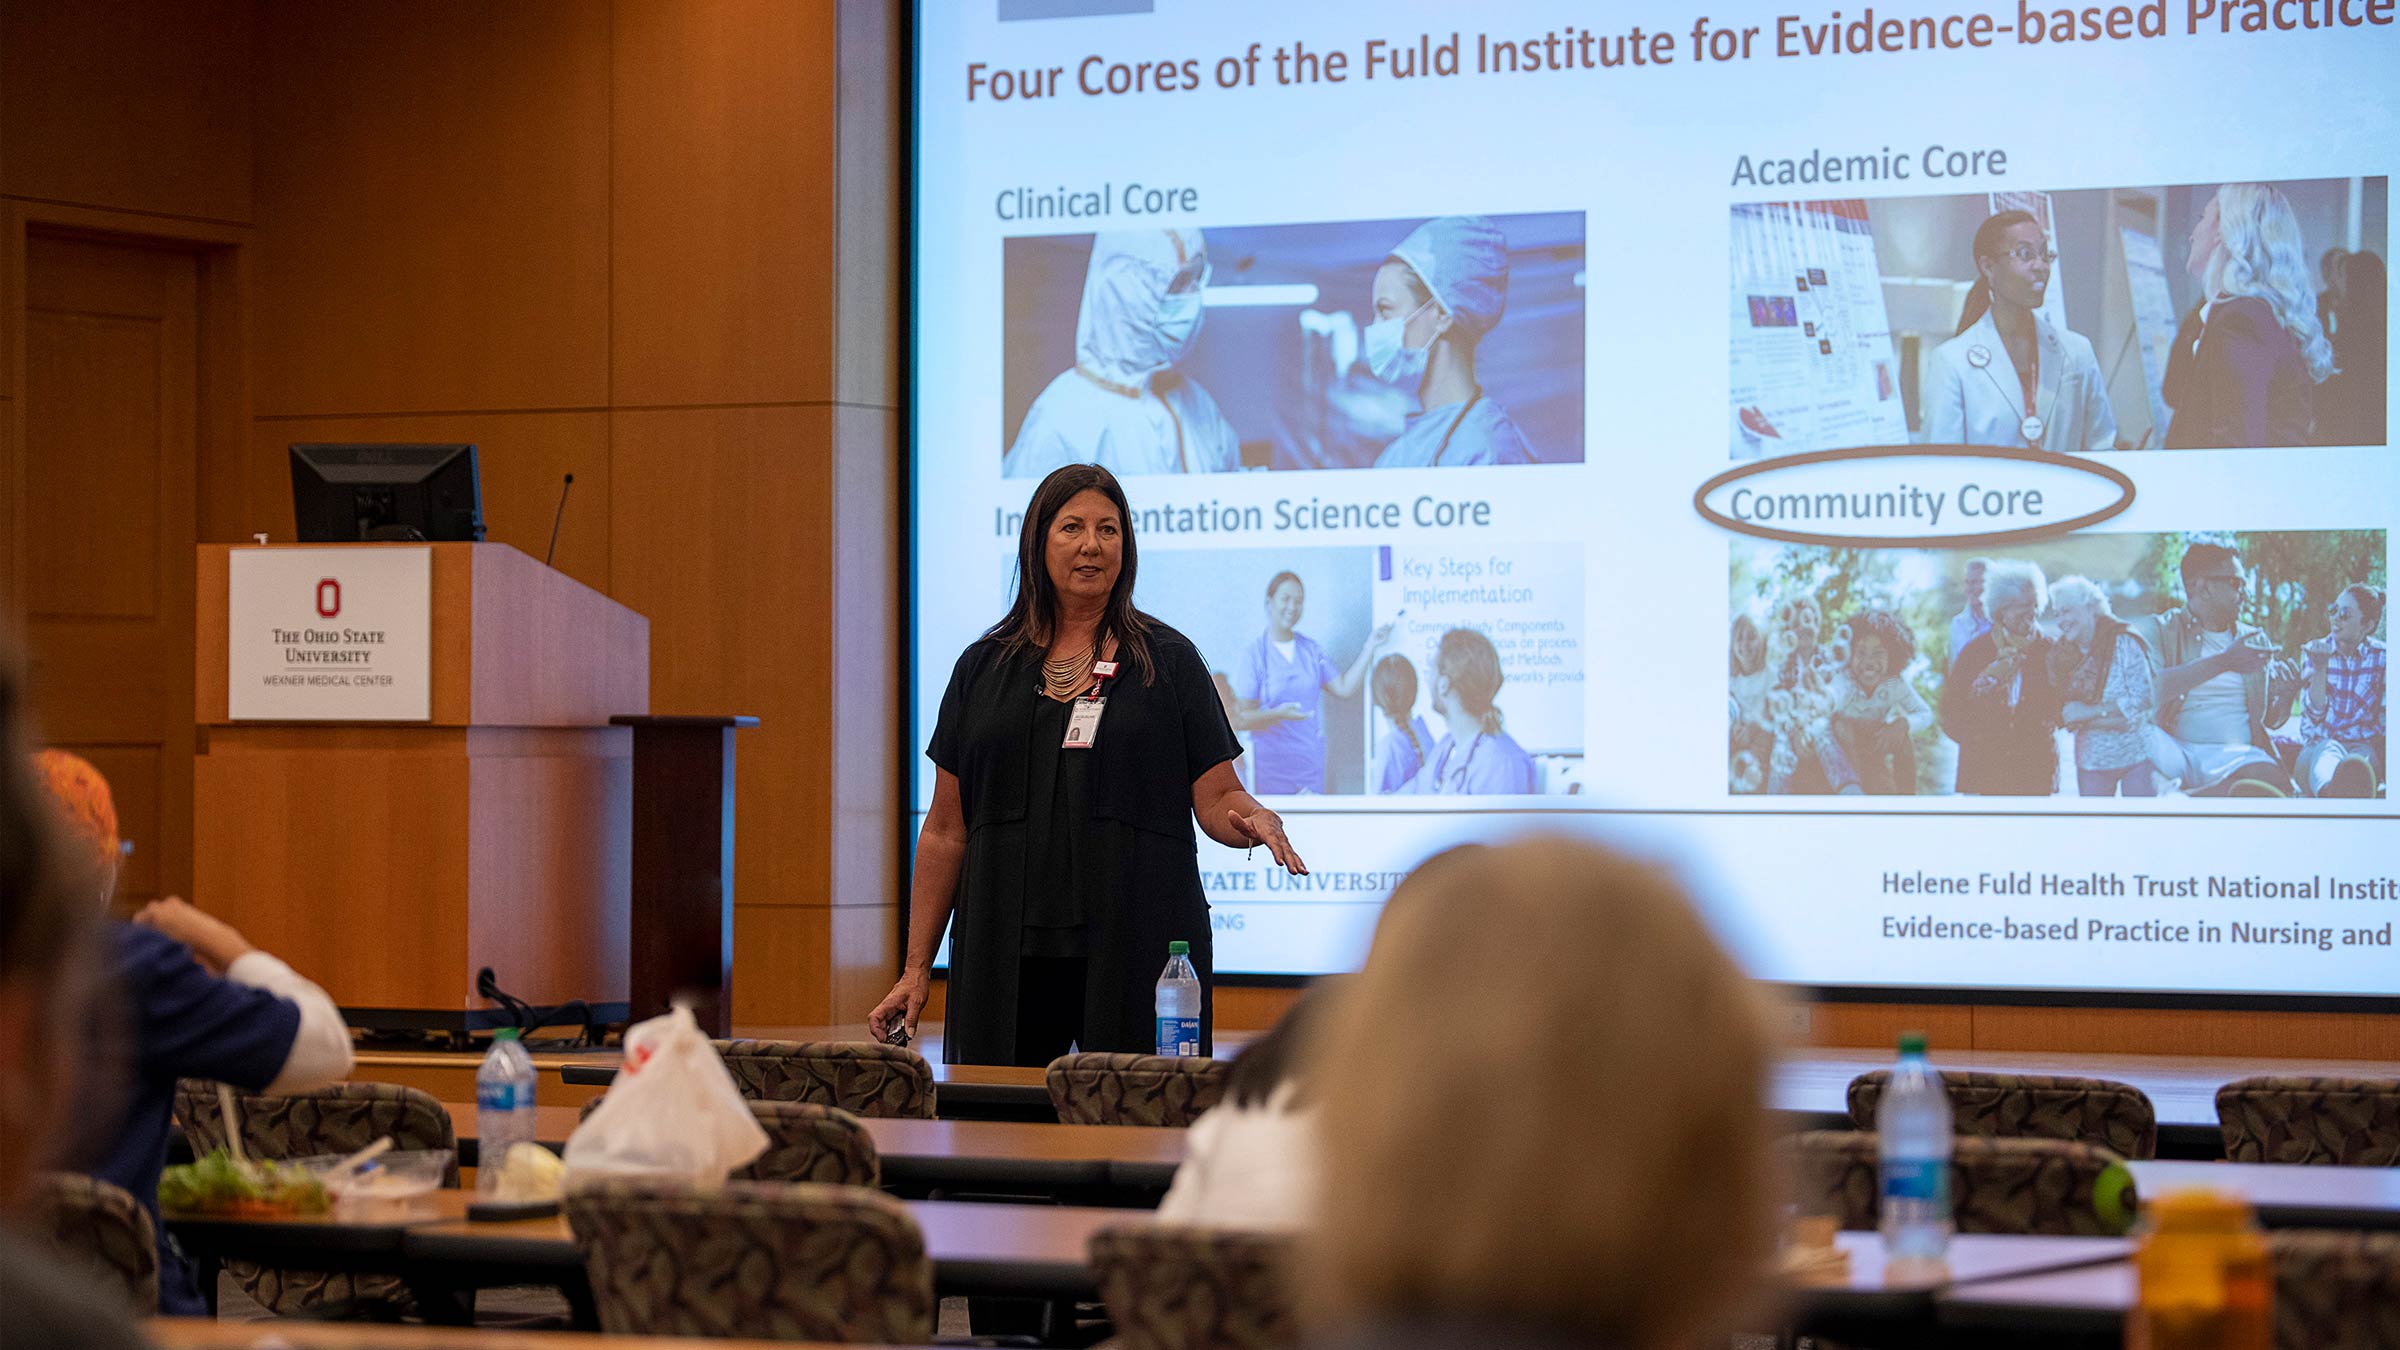 Jackie Hoying, PhD, RN, speaking about the Four Cores of the Fuld Institute for Evidence Based Practice